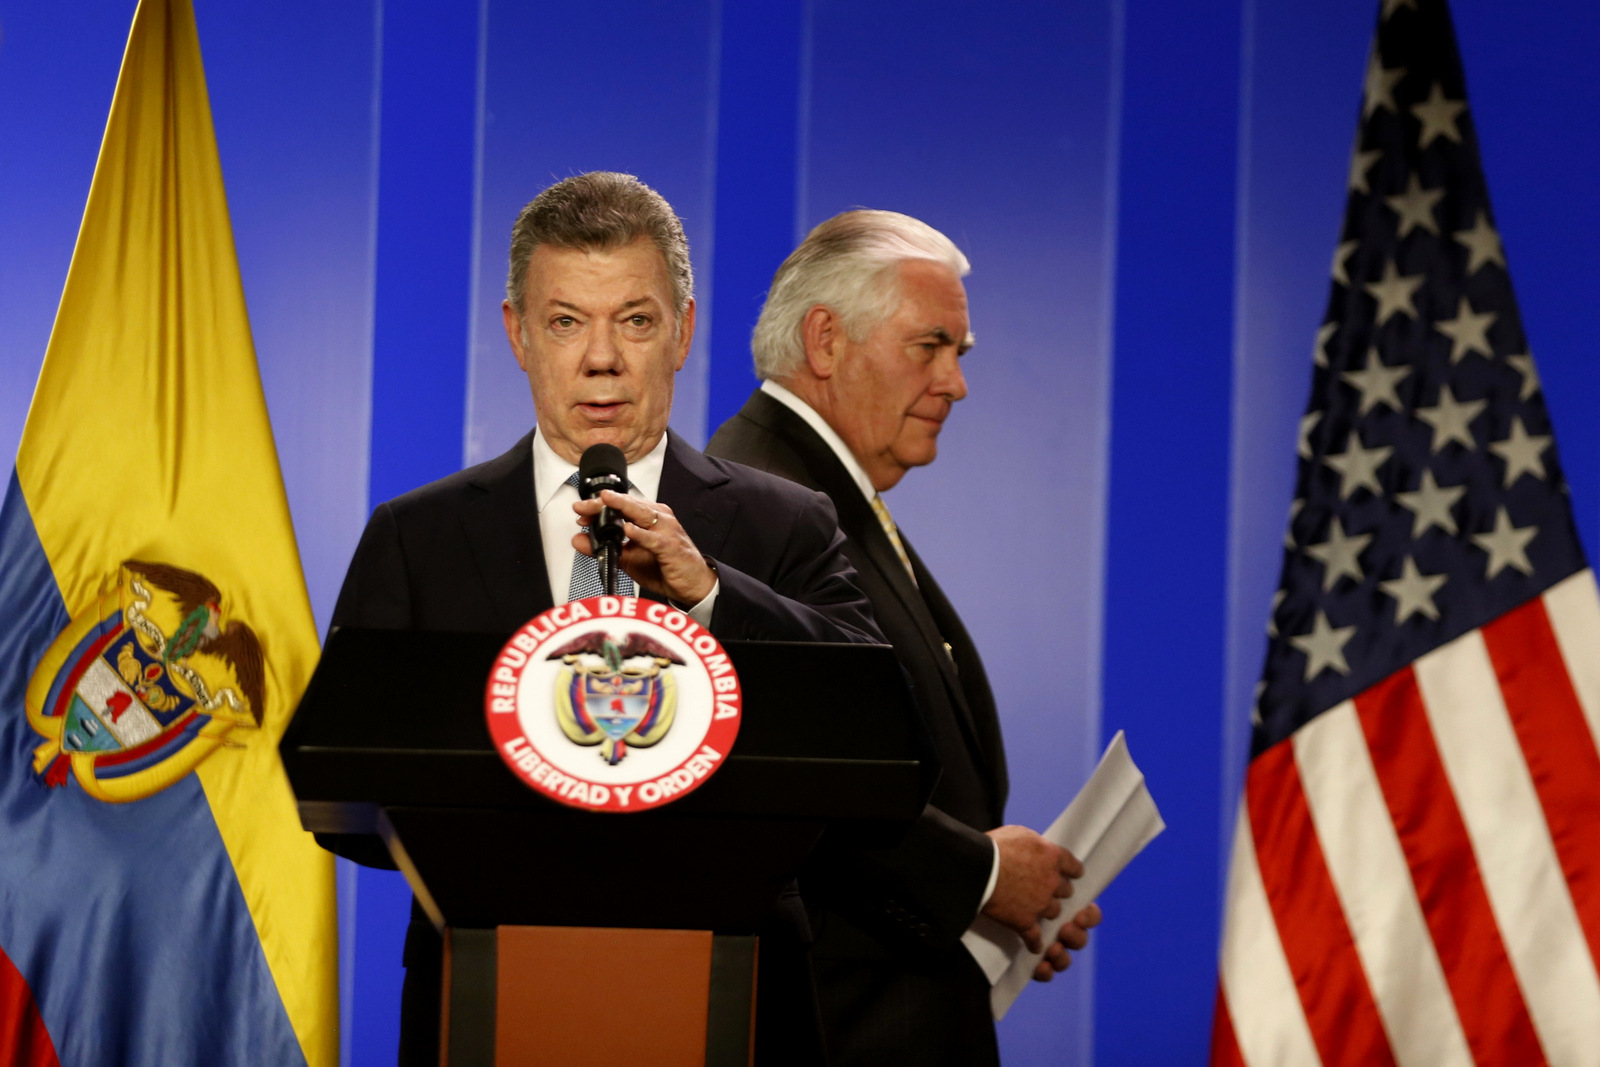 Colombia's President Juan Manuel Santos, front, and U.S. Secretary of State Rex Tillerson arrive to hold a press conference after a meeting at the presidential palace in Bogota, Colombia, Feb. 6, 2018. (AP/Fernando Vergara)